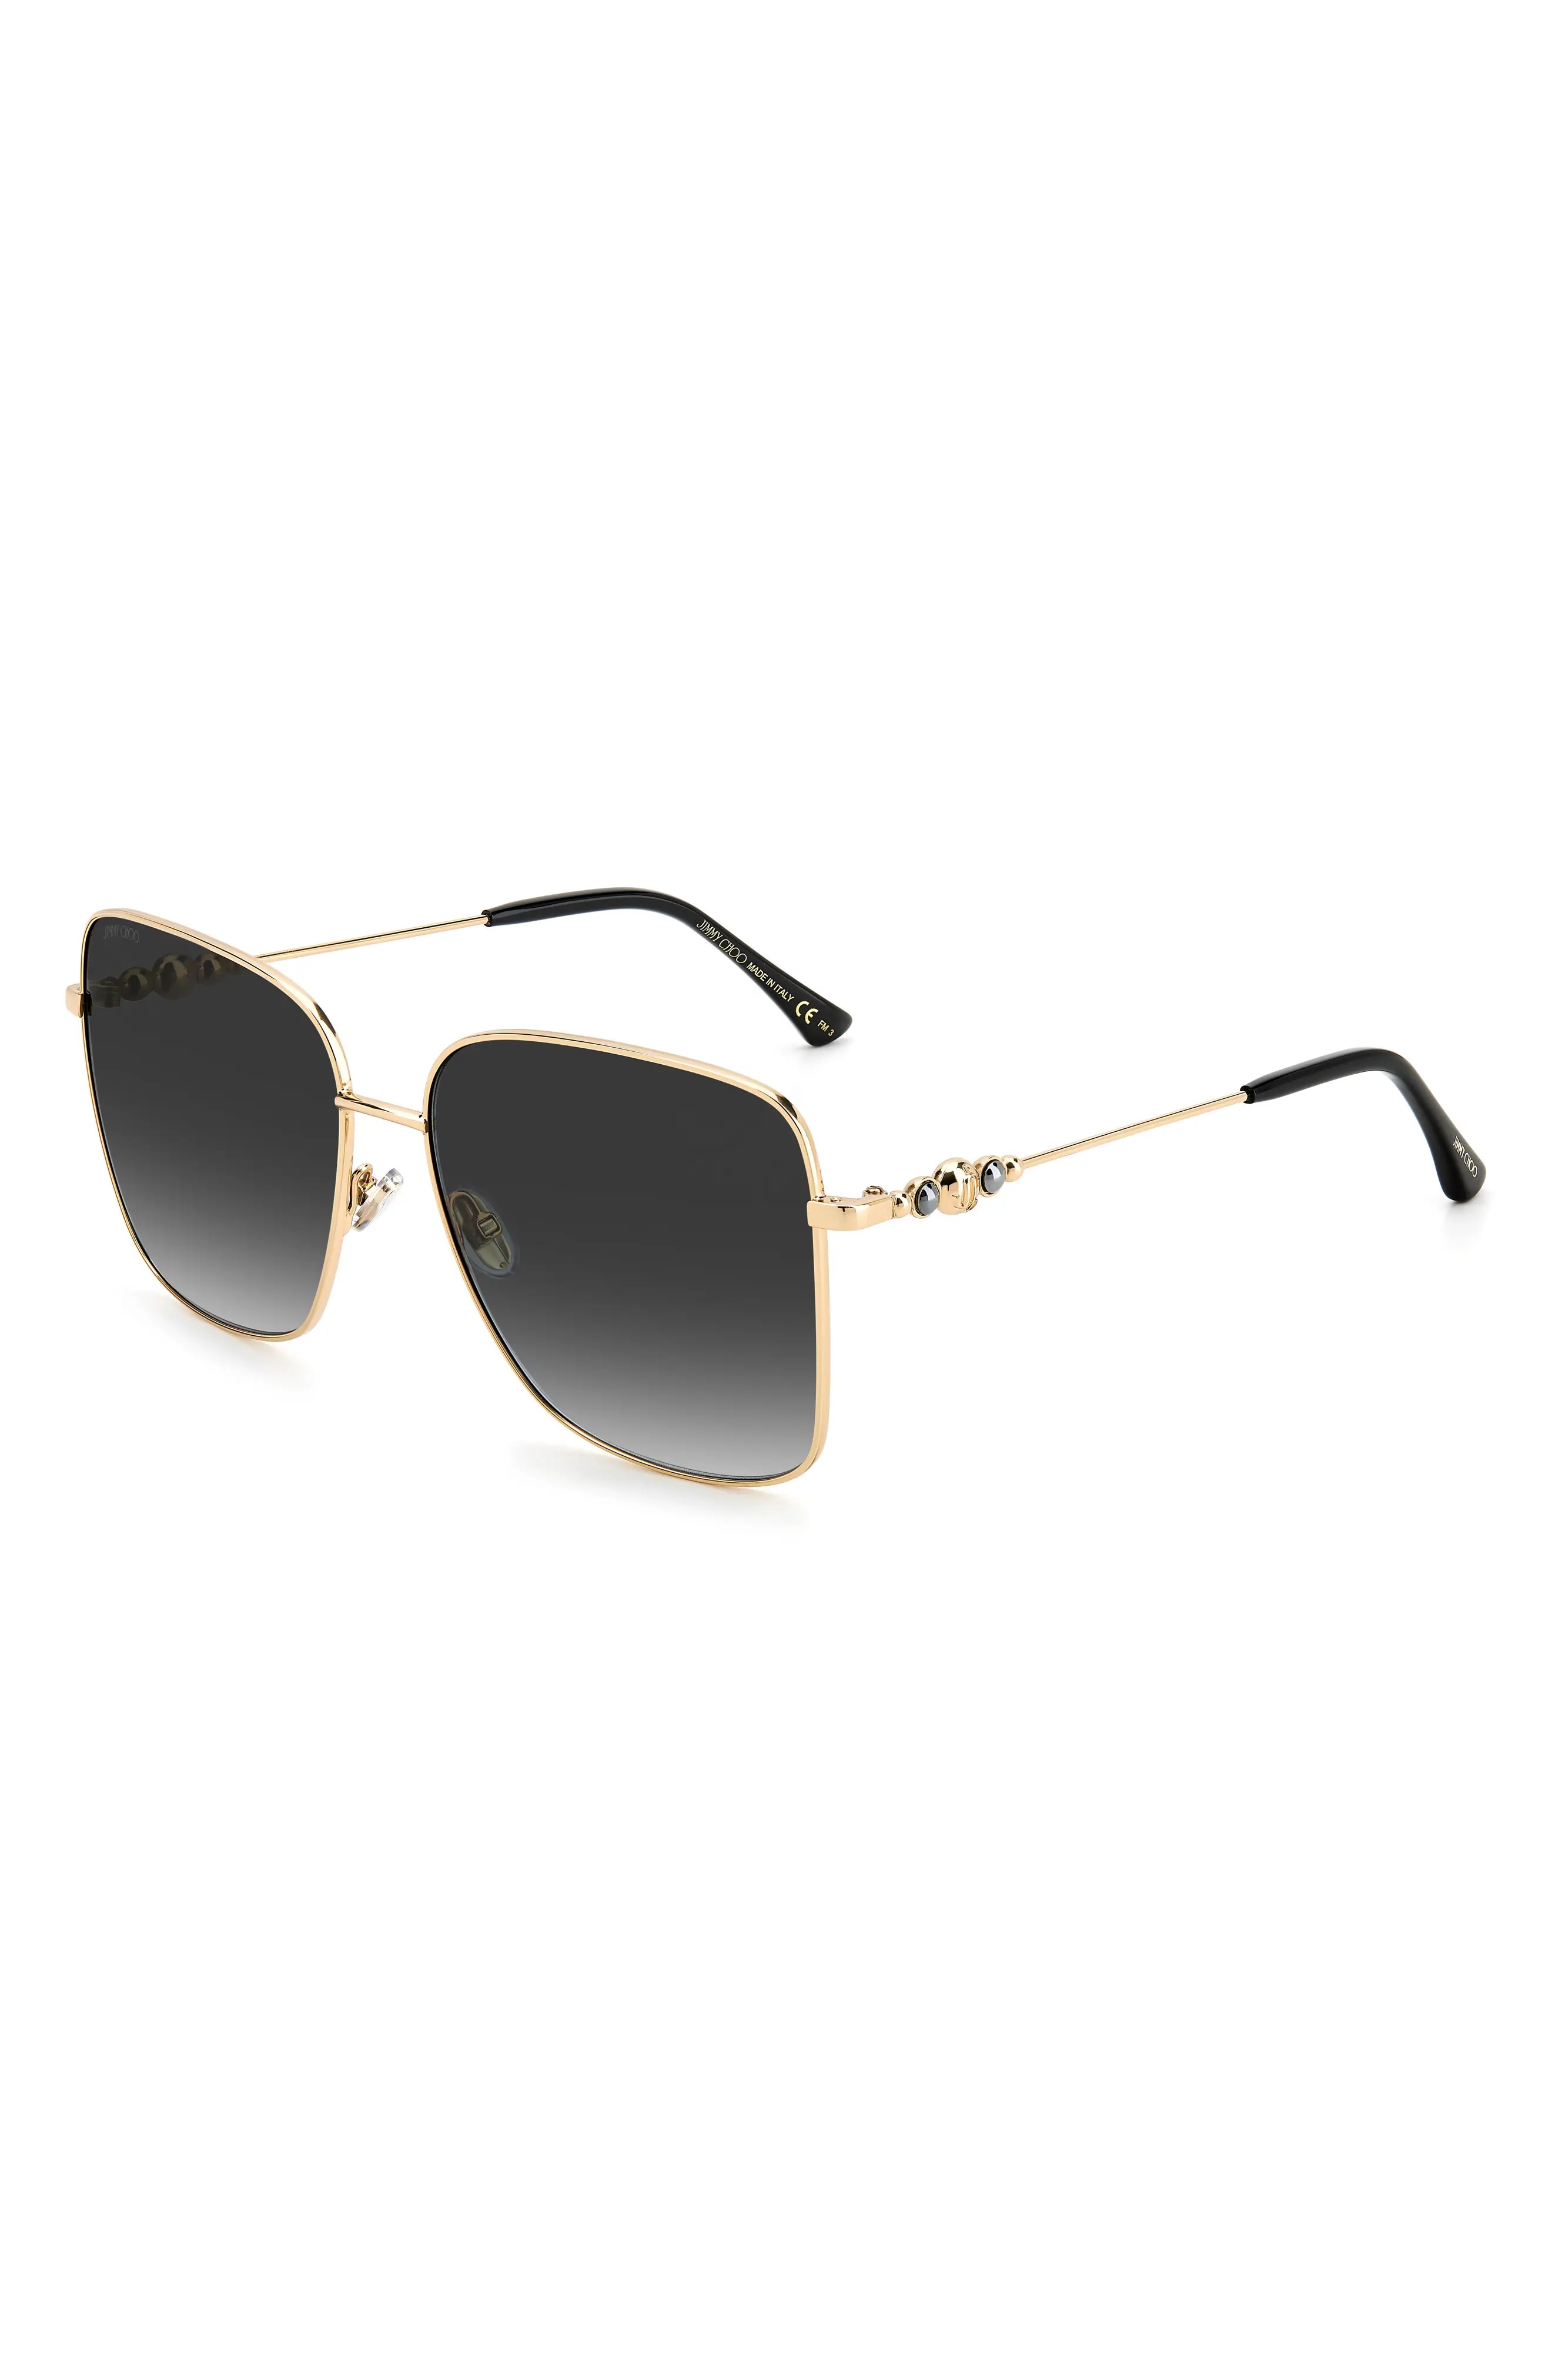 Hesters 59mm Gradient Square Sunglasses in Black Gold /Grey Shaded - 2